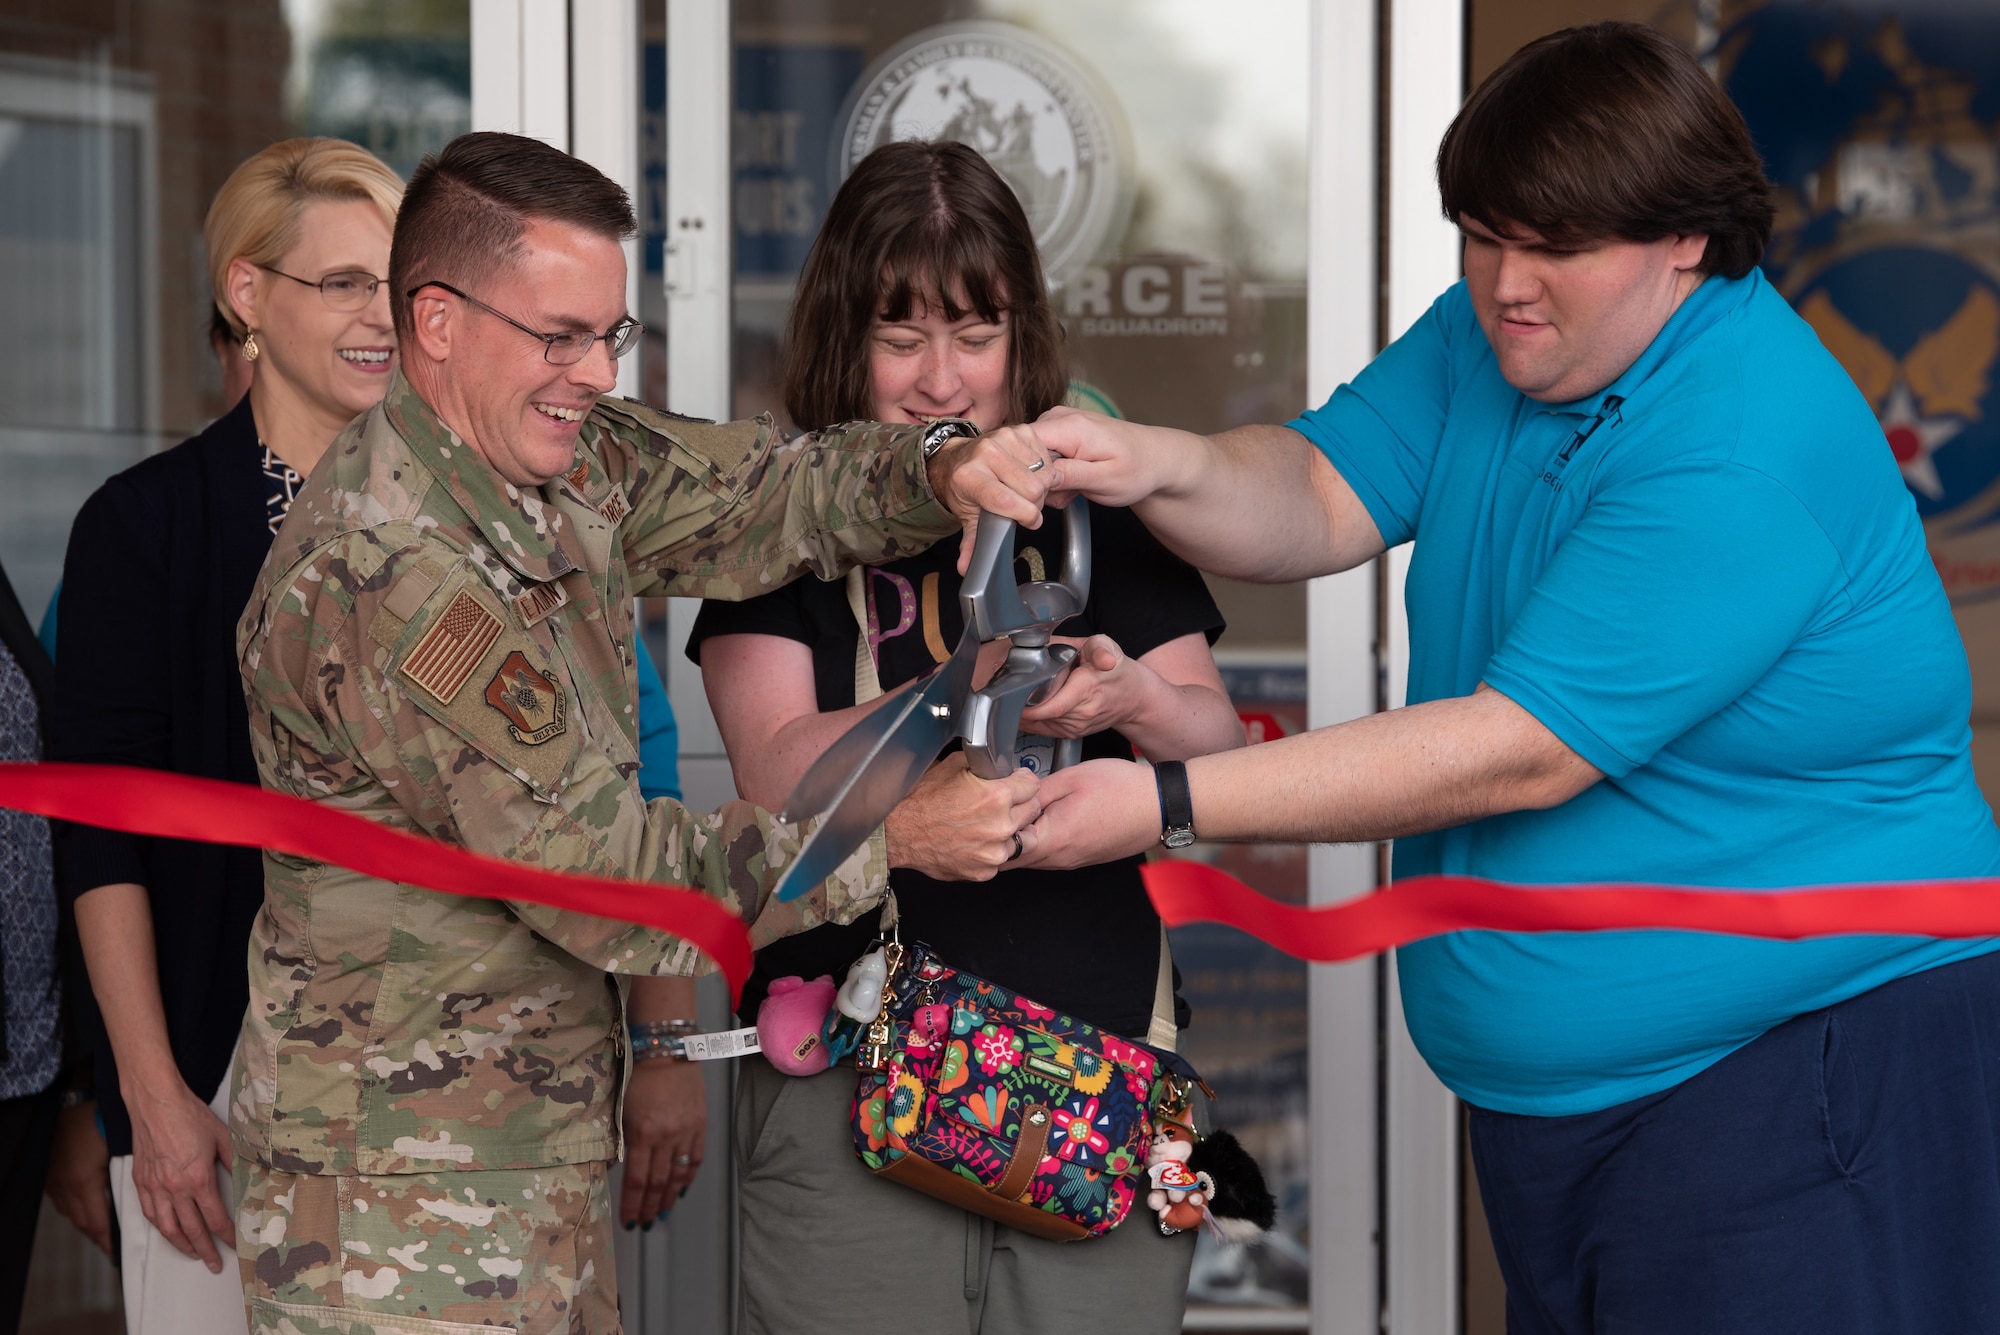 U.S. Air Force Col. J. Scot Heathman, 375th Air Mobility Wing commander, Jimmy Howe, and Heather McKenney, Exceptional Family Member Program members, cut the ribbon signifying the completion of the renovation of the EFMP One Stop on Scott Air Force Base, Illinois, June 24, 2021. The Airman & Family Readiness Center at Scott AFB brought together components of the EFMP One Stop to serve the families at Scott. (U.S. Air Force photo by Airman 1st Class Stephanie Henry)